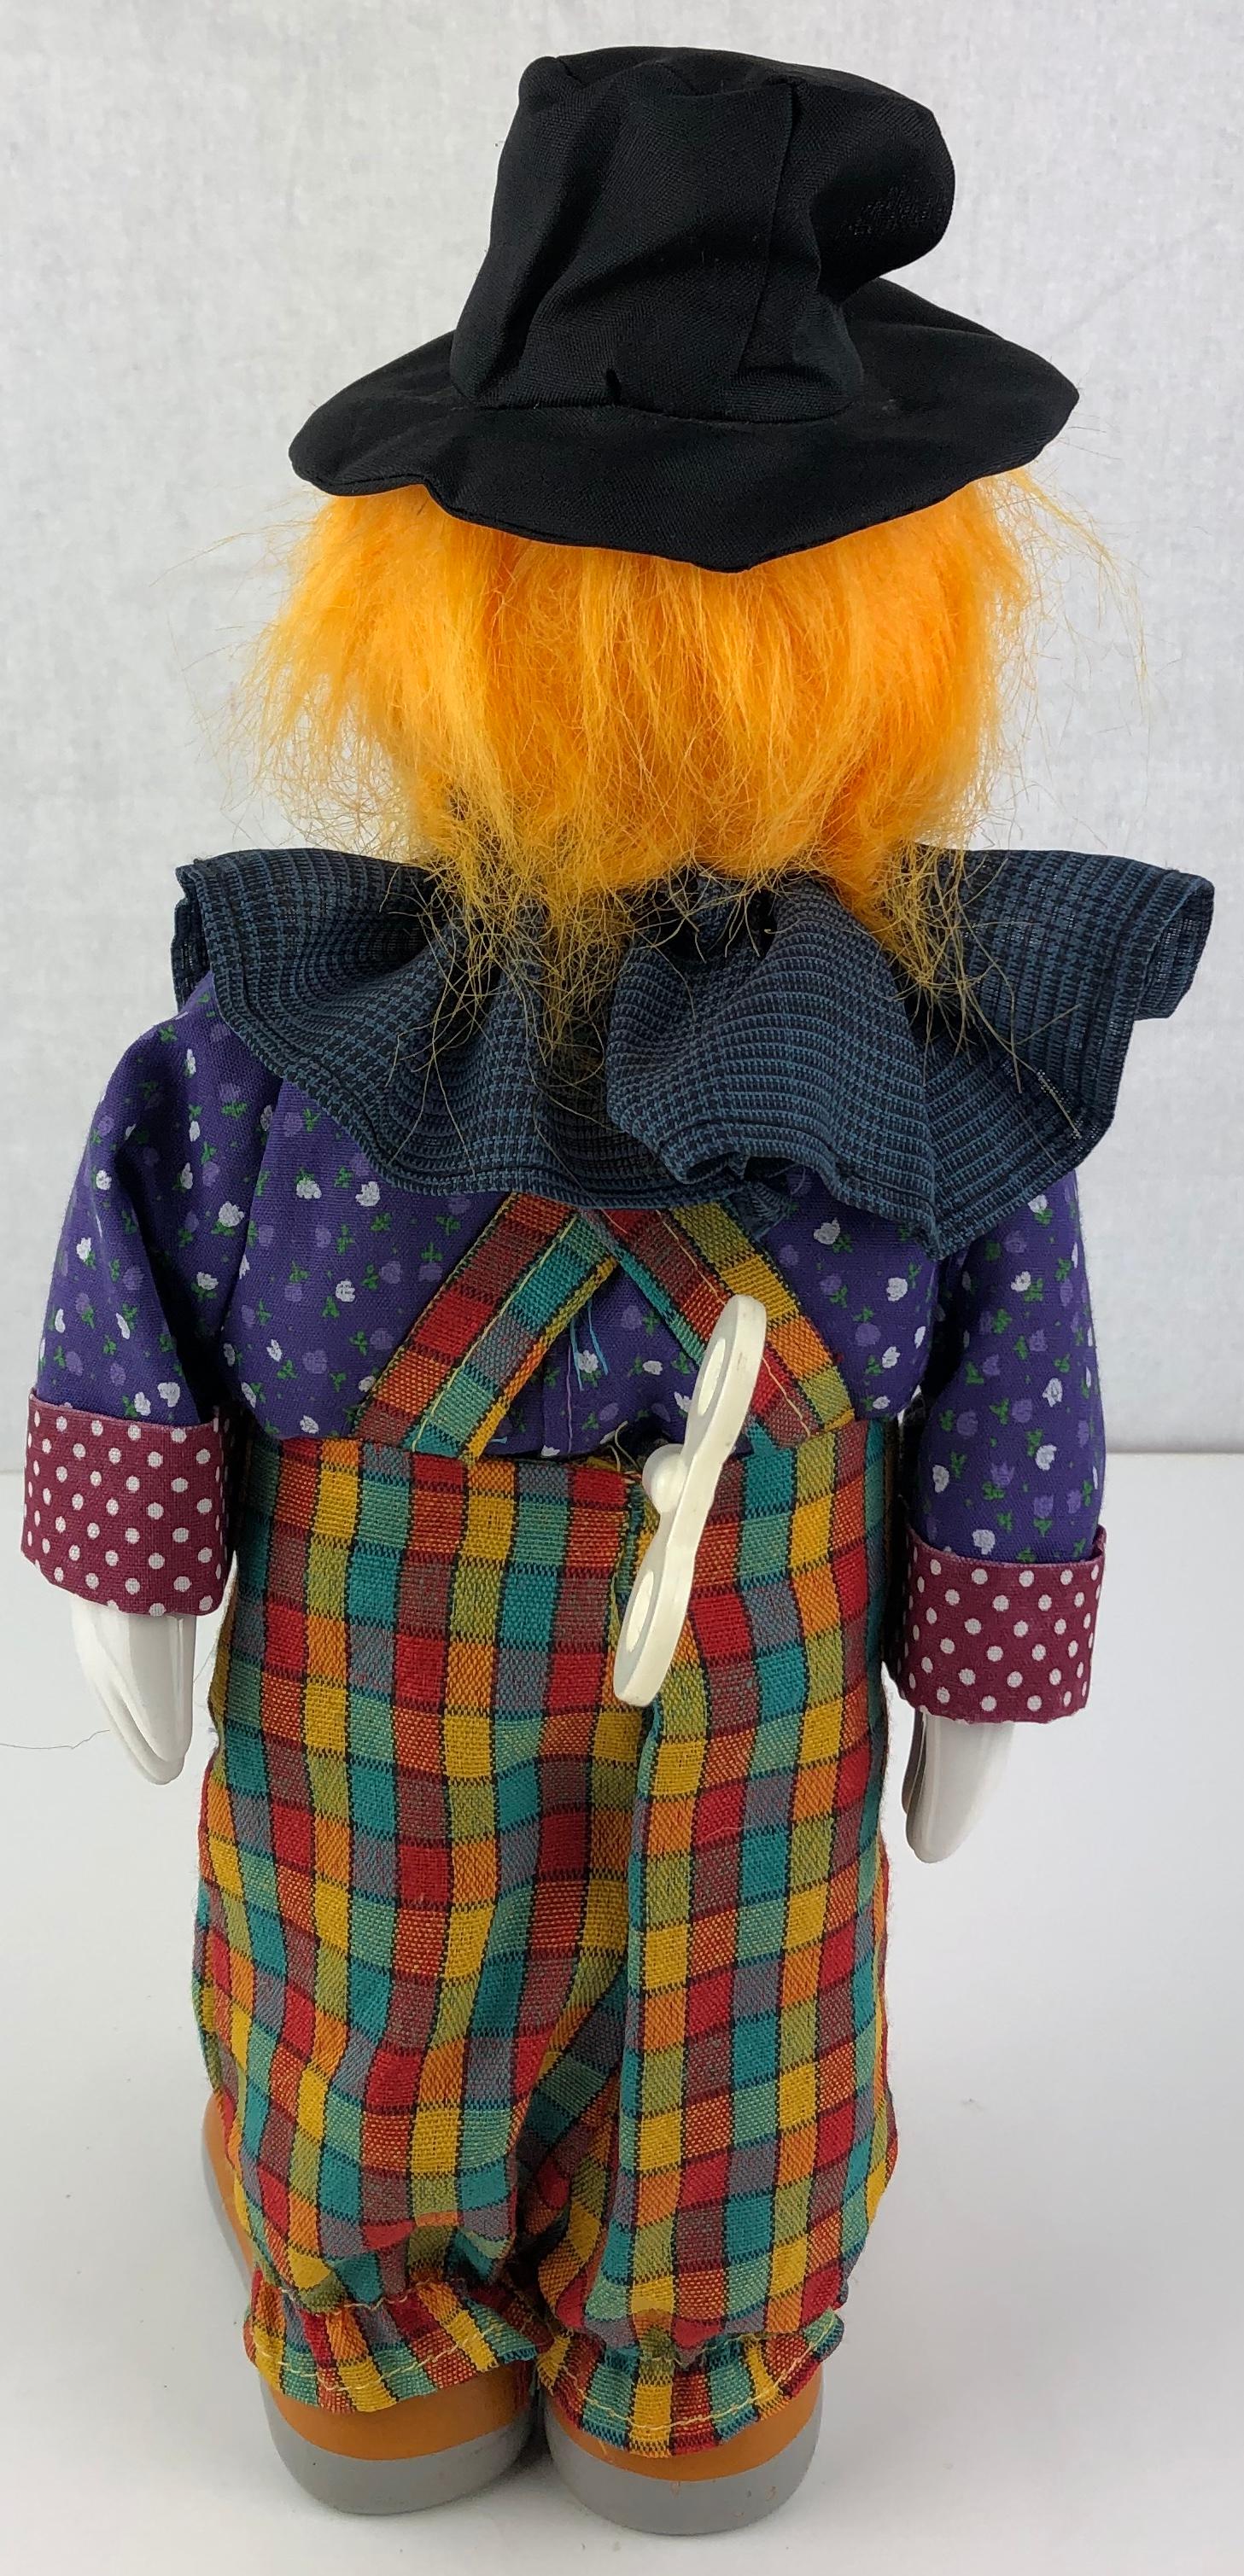 A fine quality therapeutic musical automaton clown toy in wonderful vintage condition.
Features porcelain head, hands and feet. 
Made in France during the 1950s and is in perfect working condition.

Measures: 6